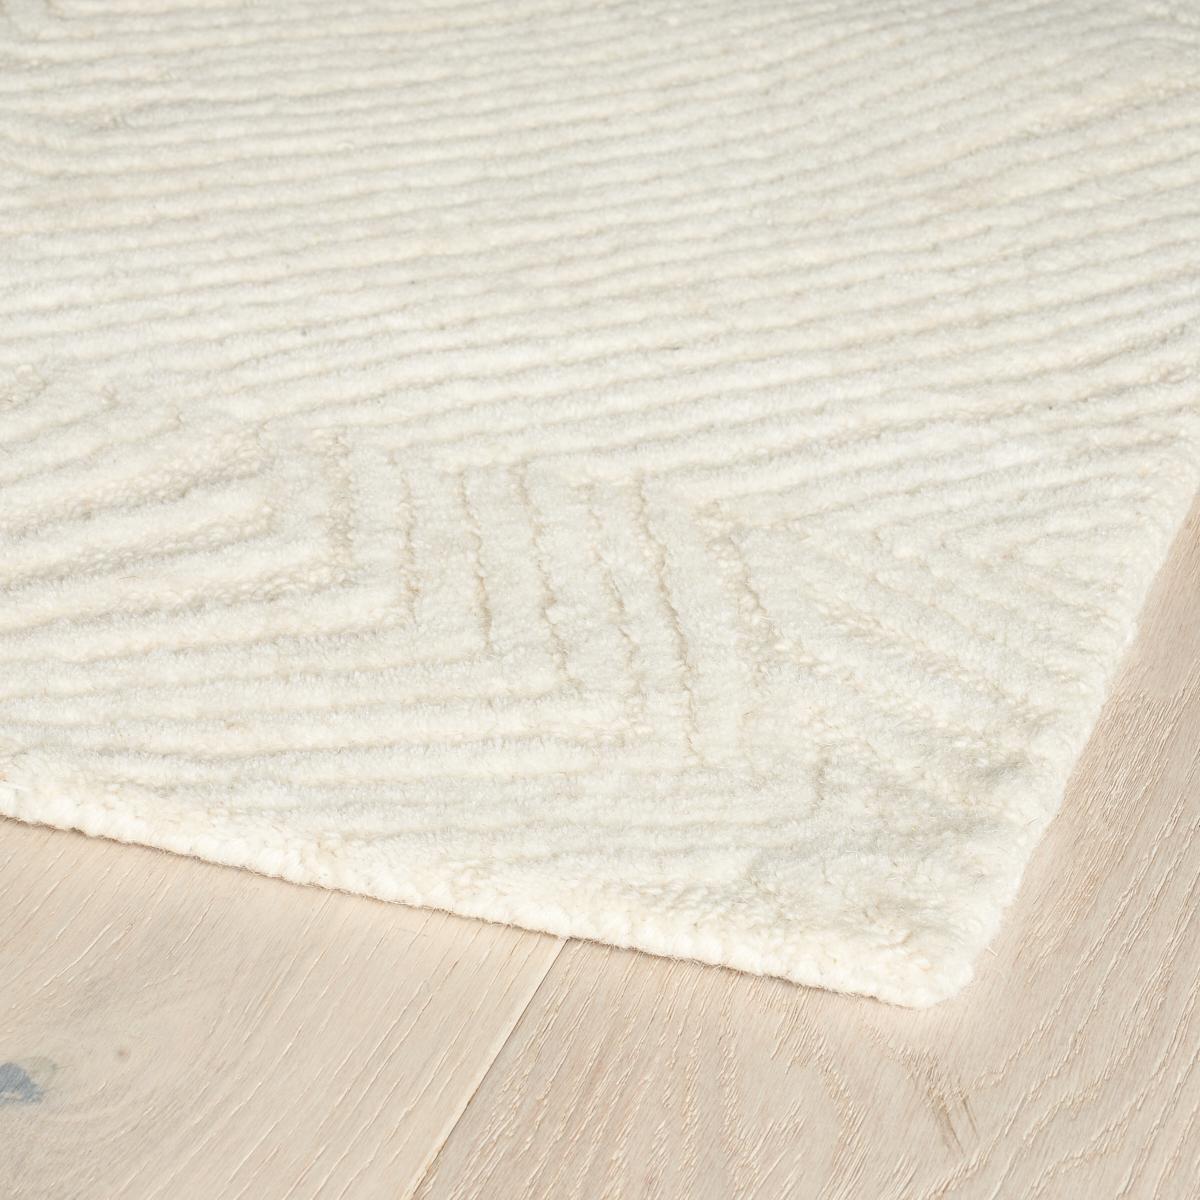 Hand tufted and made of 100% wool, Rimini has loop and cut pile construction that forms an intricate, topographical design. With its extraordinary texture and refined border detail, this rug is soft and subtle yet modern and graphic.